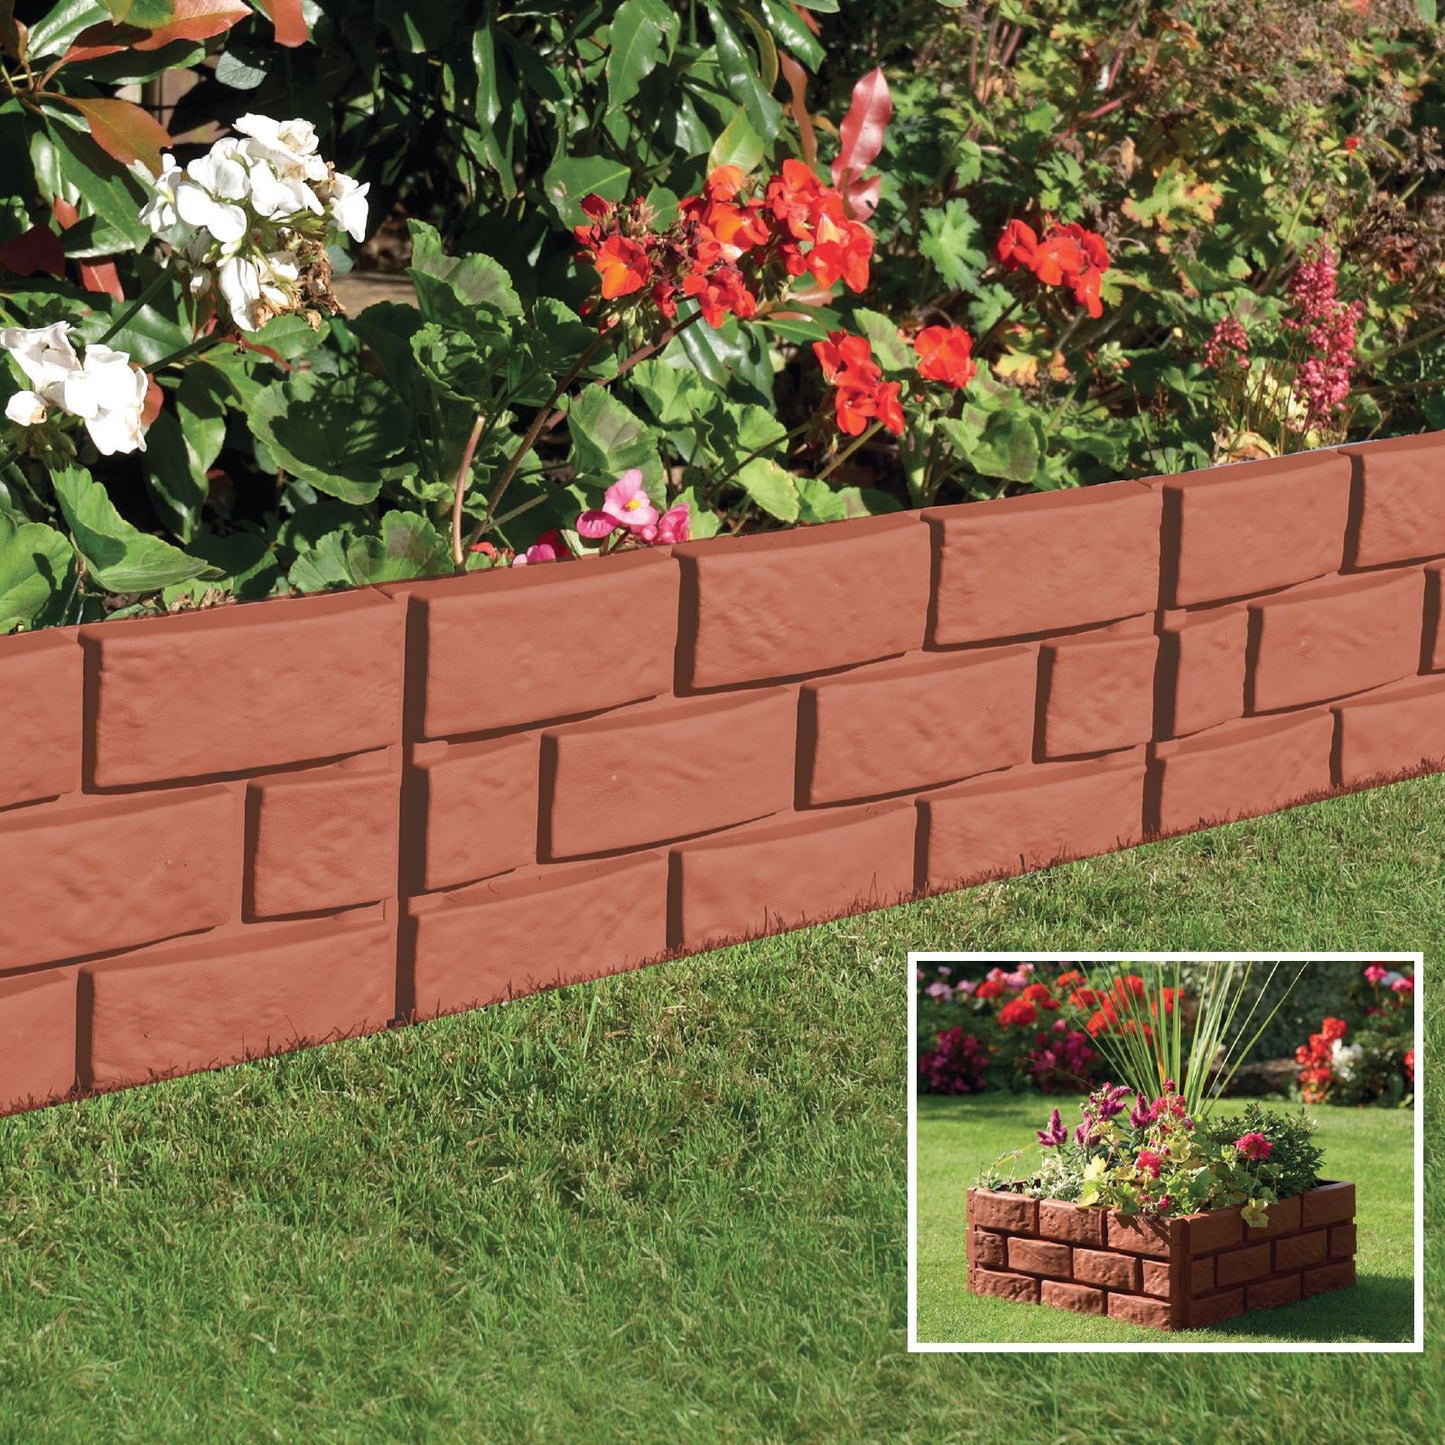 Set Of 4 Hammer-In Garden Edging Fences With Brick-Look Finish